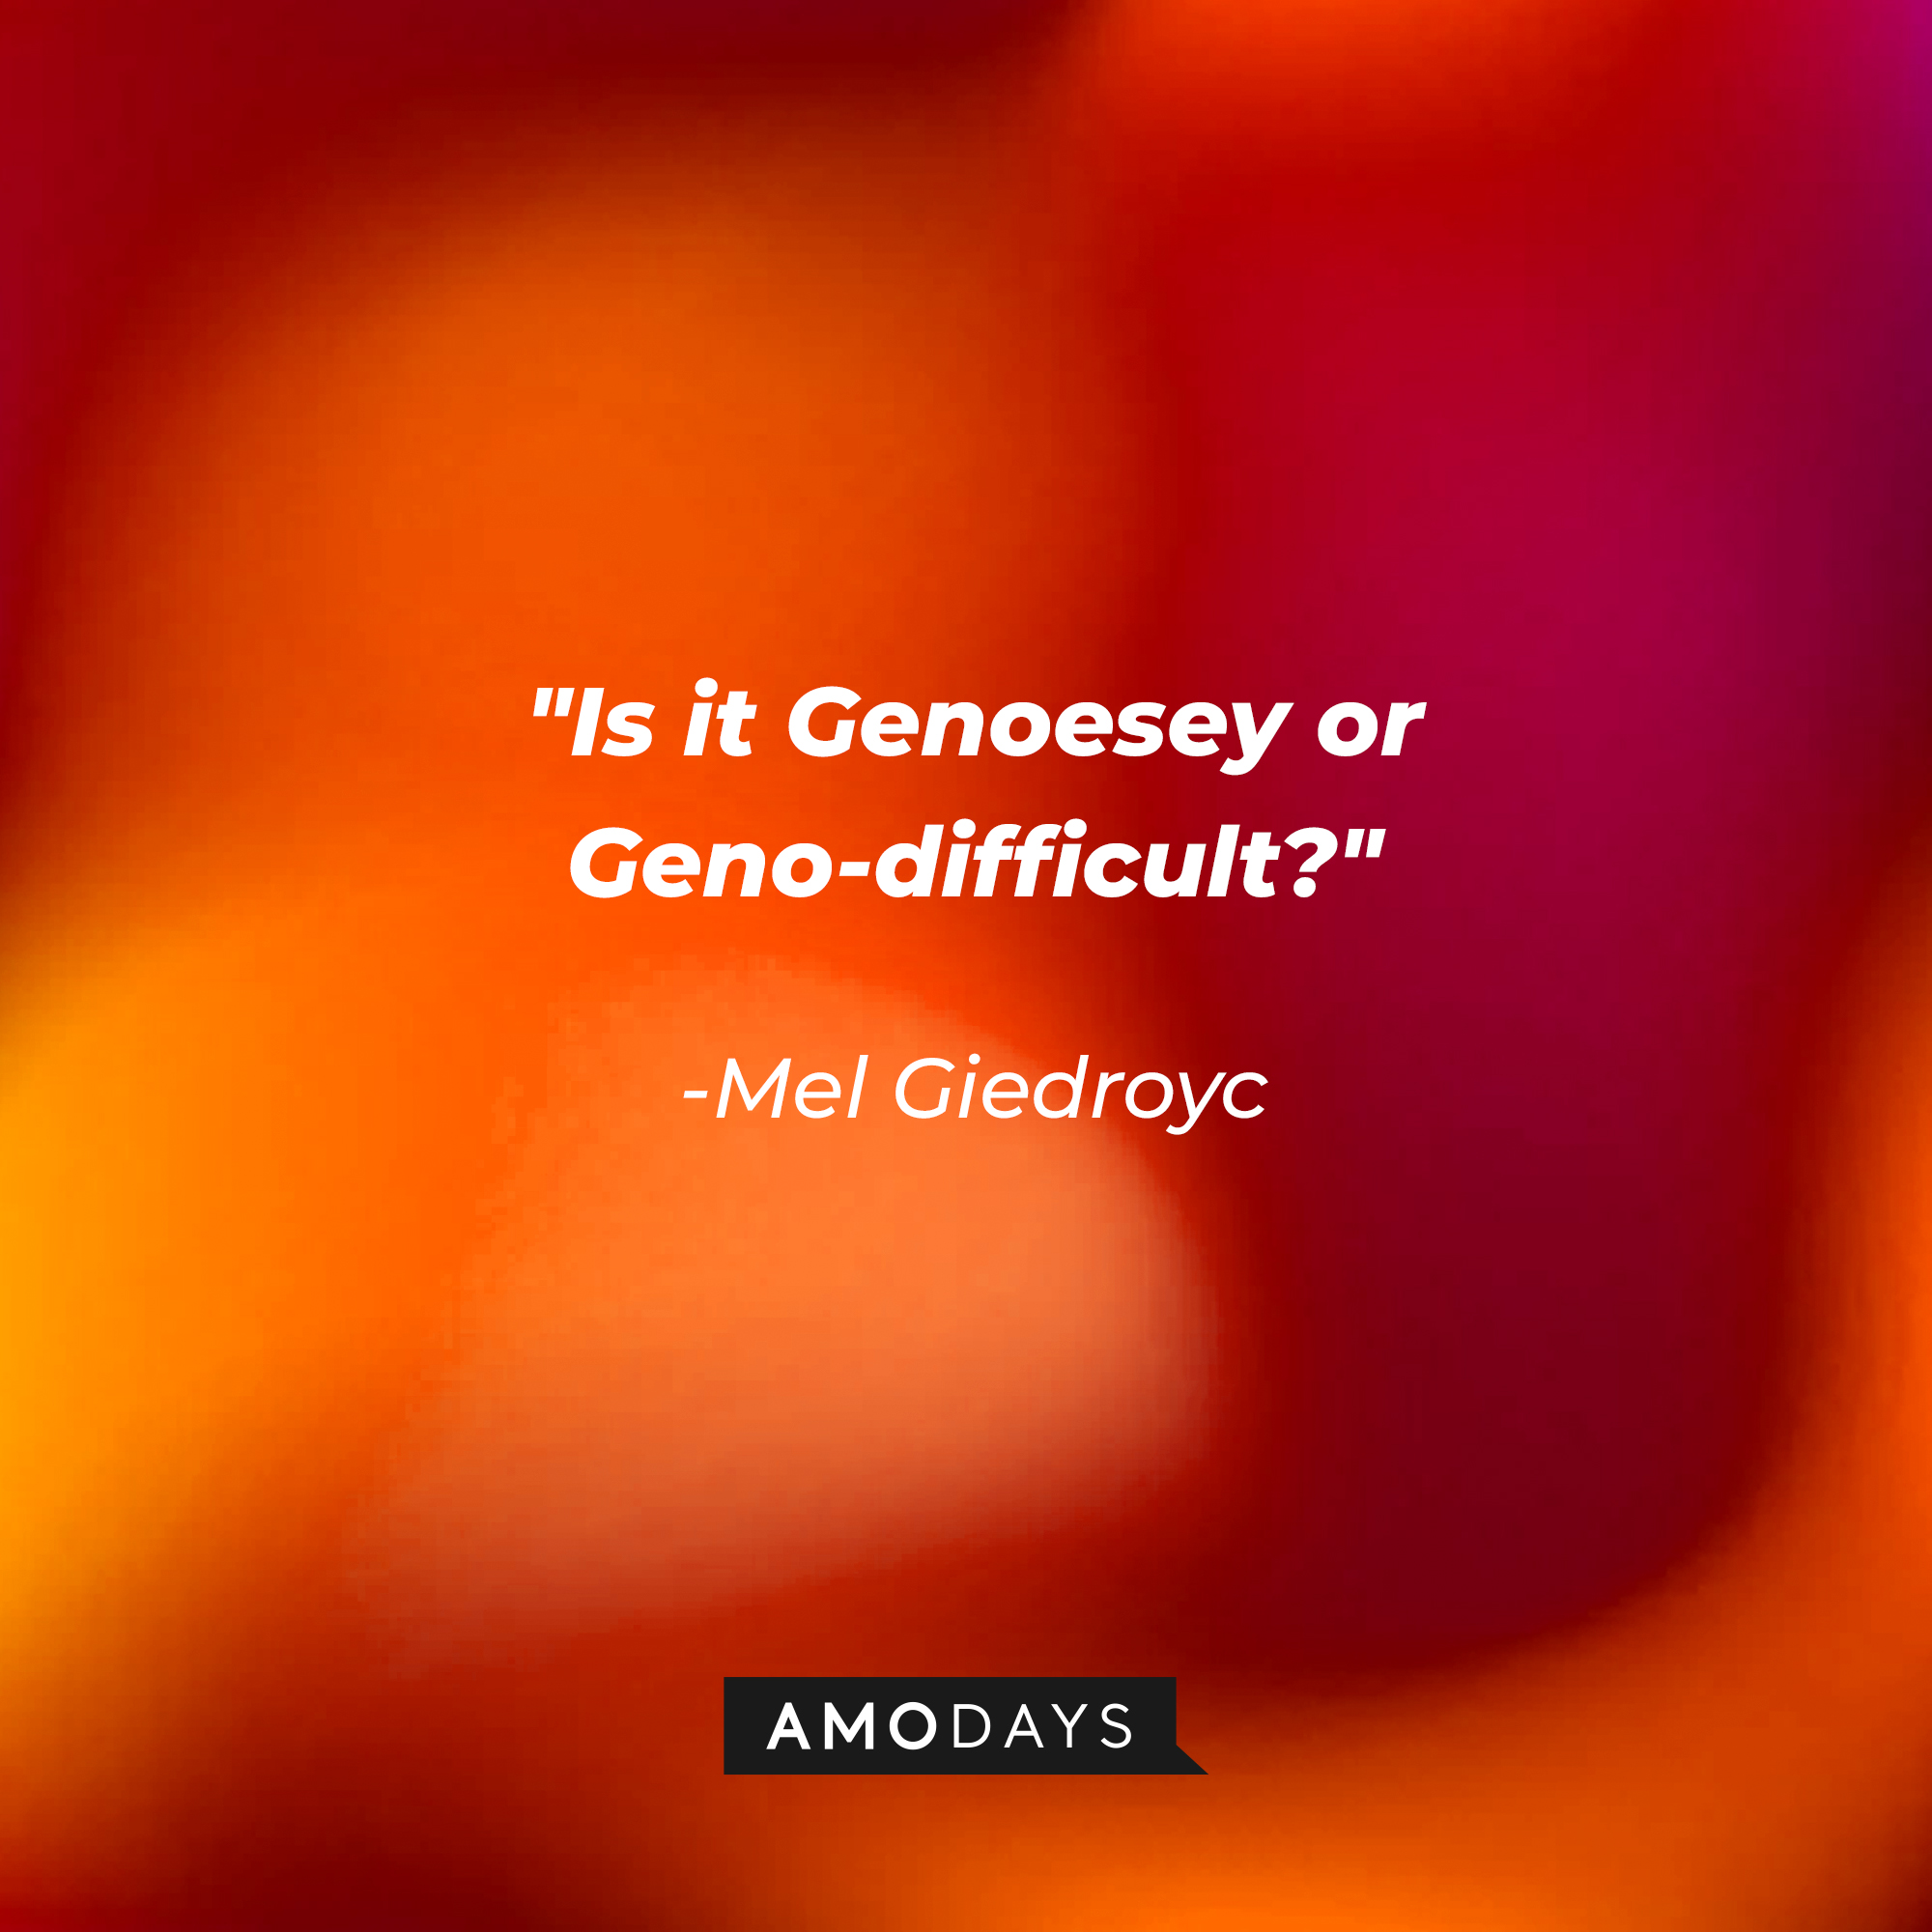 Mel Giedroyc's quote: "Is it Genoesey or Geno-difficult?" | Image: AmoDays